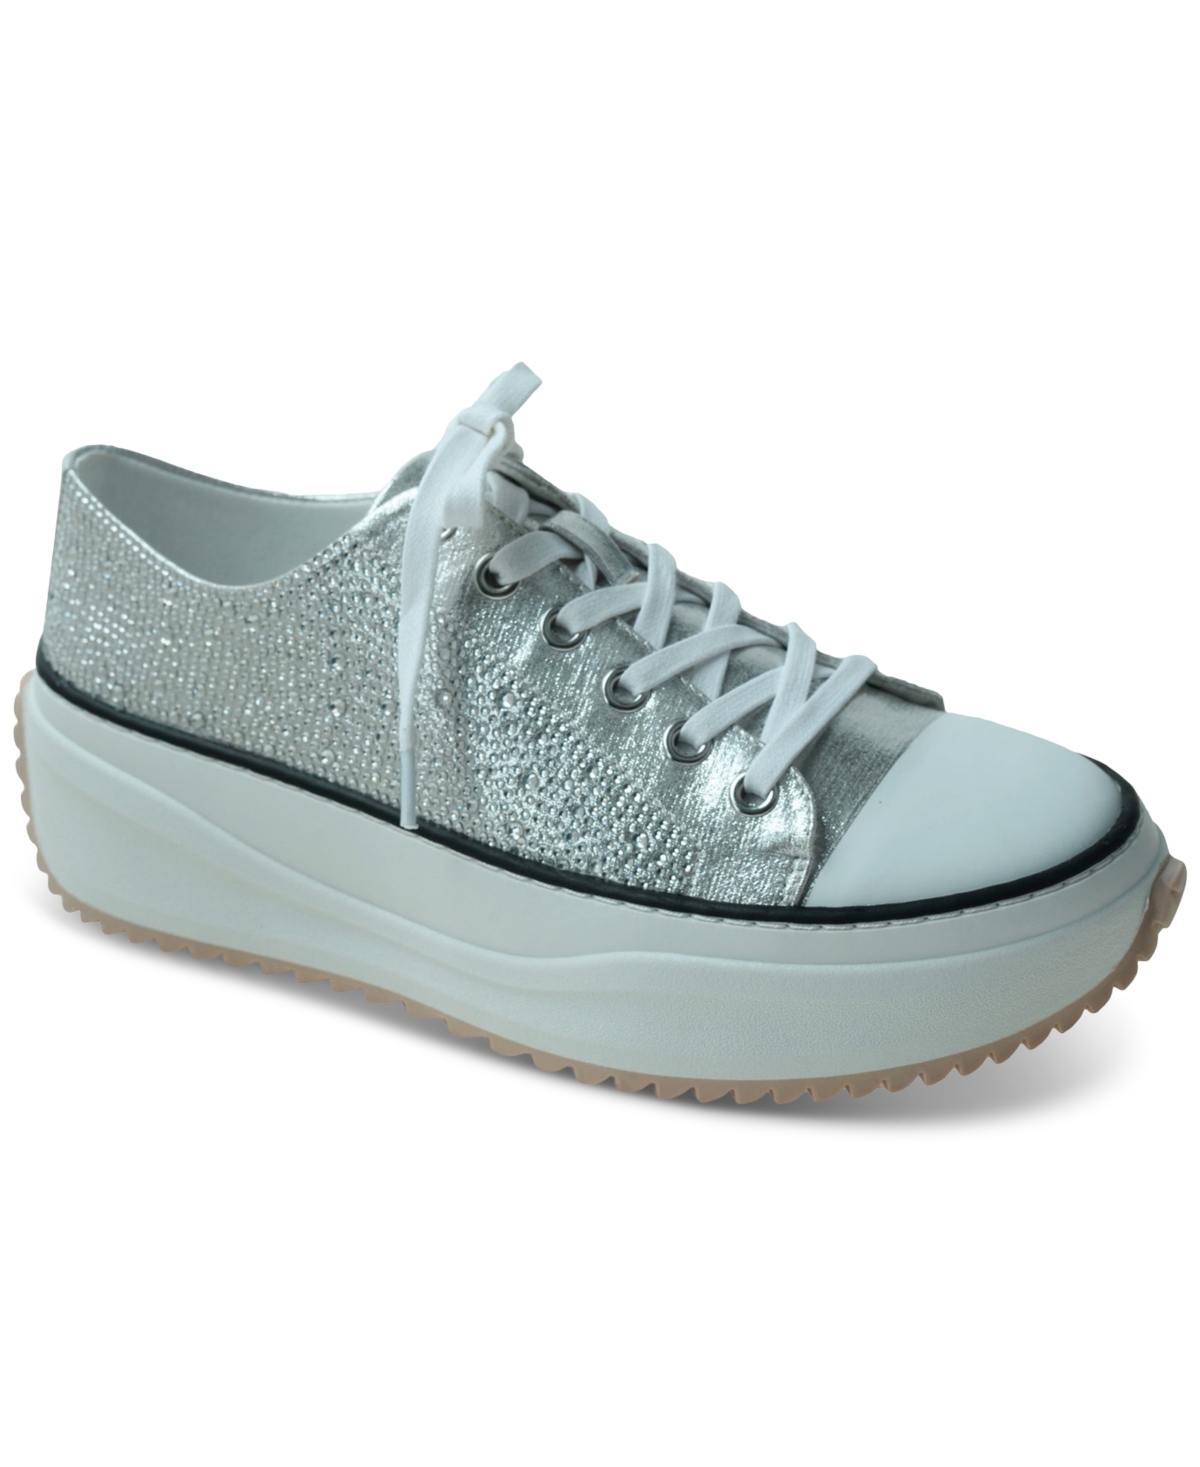 Highfive Bling Lace-Up Low-Top Sneakers, Created for Macy's - Silver Bling